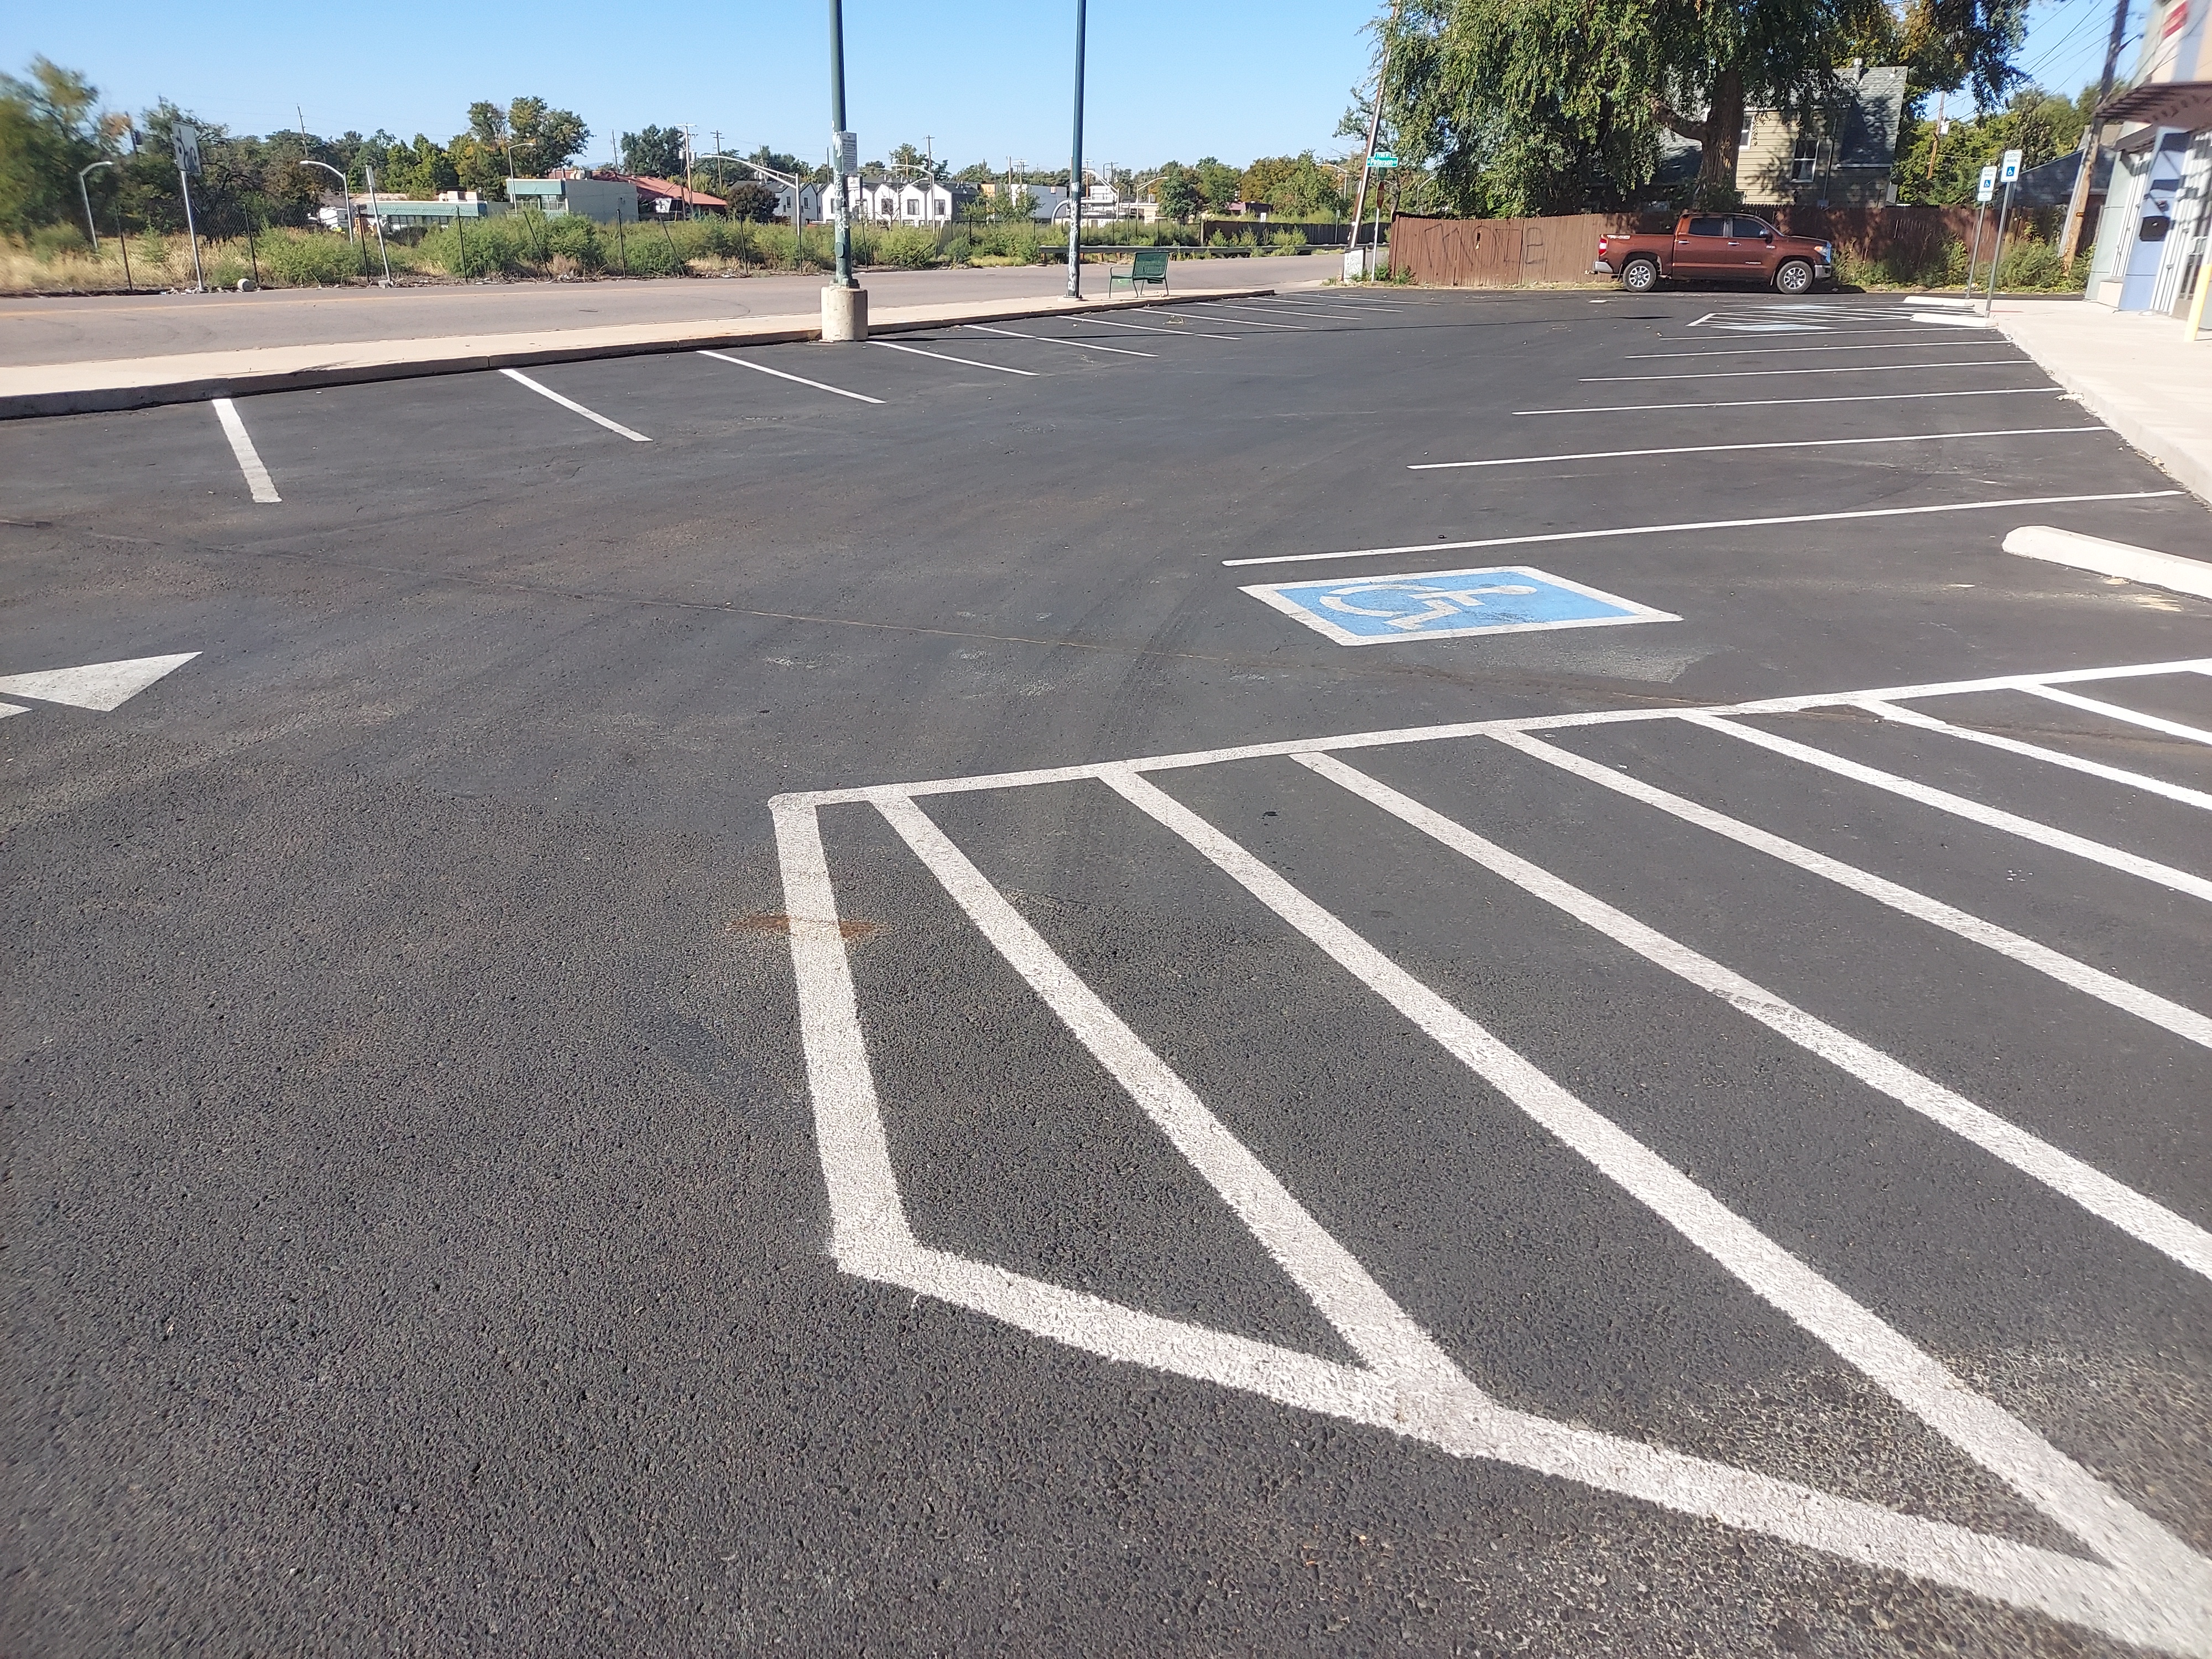 The shopping center parking lot is all cleaned up.